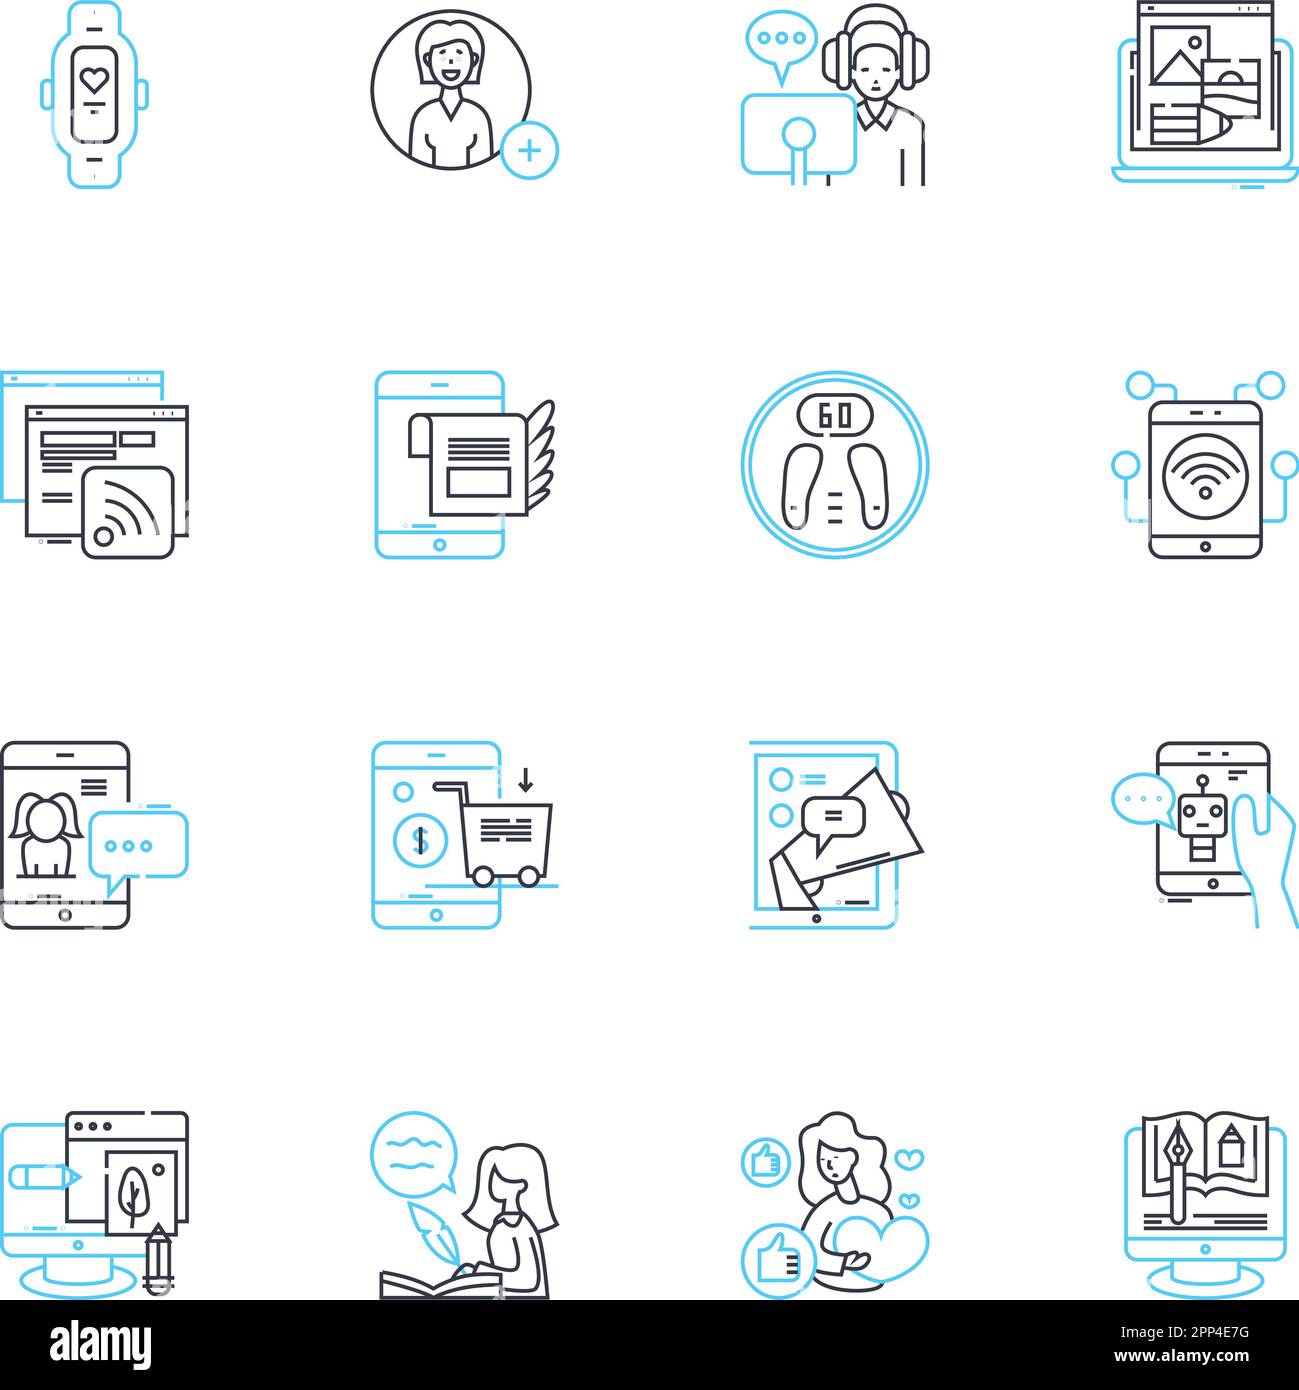 Digital technique linear icons set. Algorithm, Automation, Big data, Blockchain, Cloud, Coding, Cybersecurity line vector and concept signs. Data Stock Vector